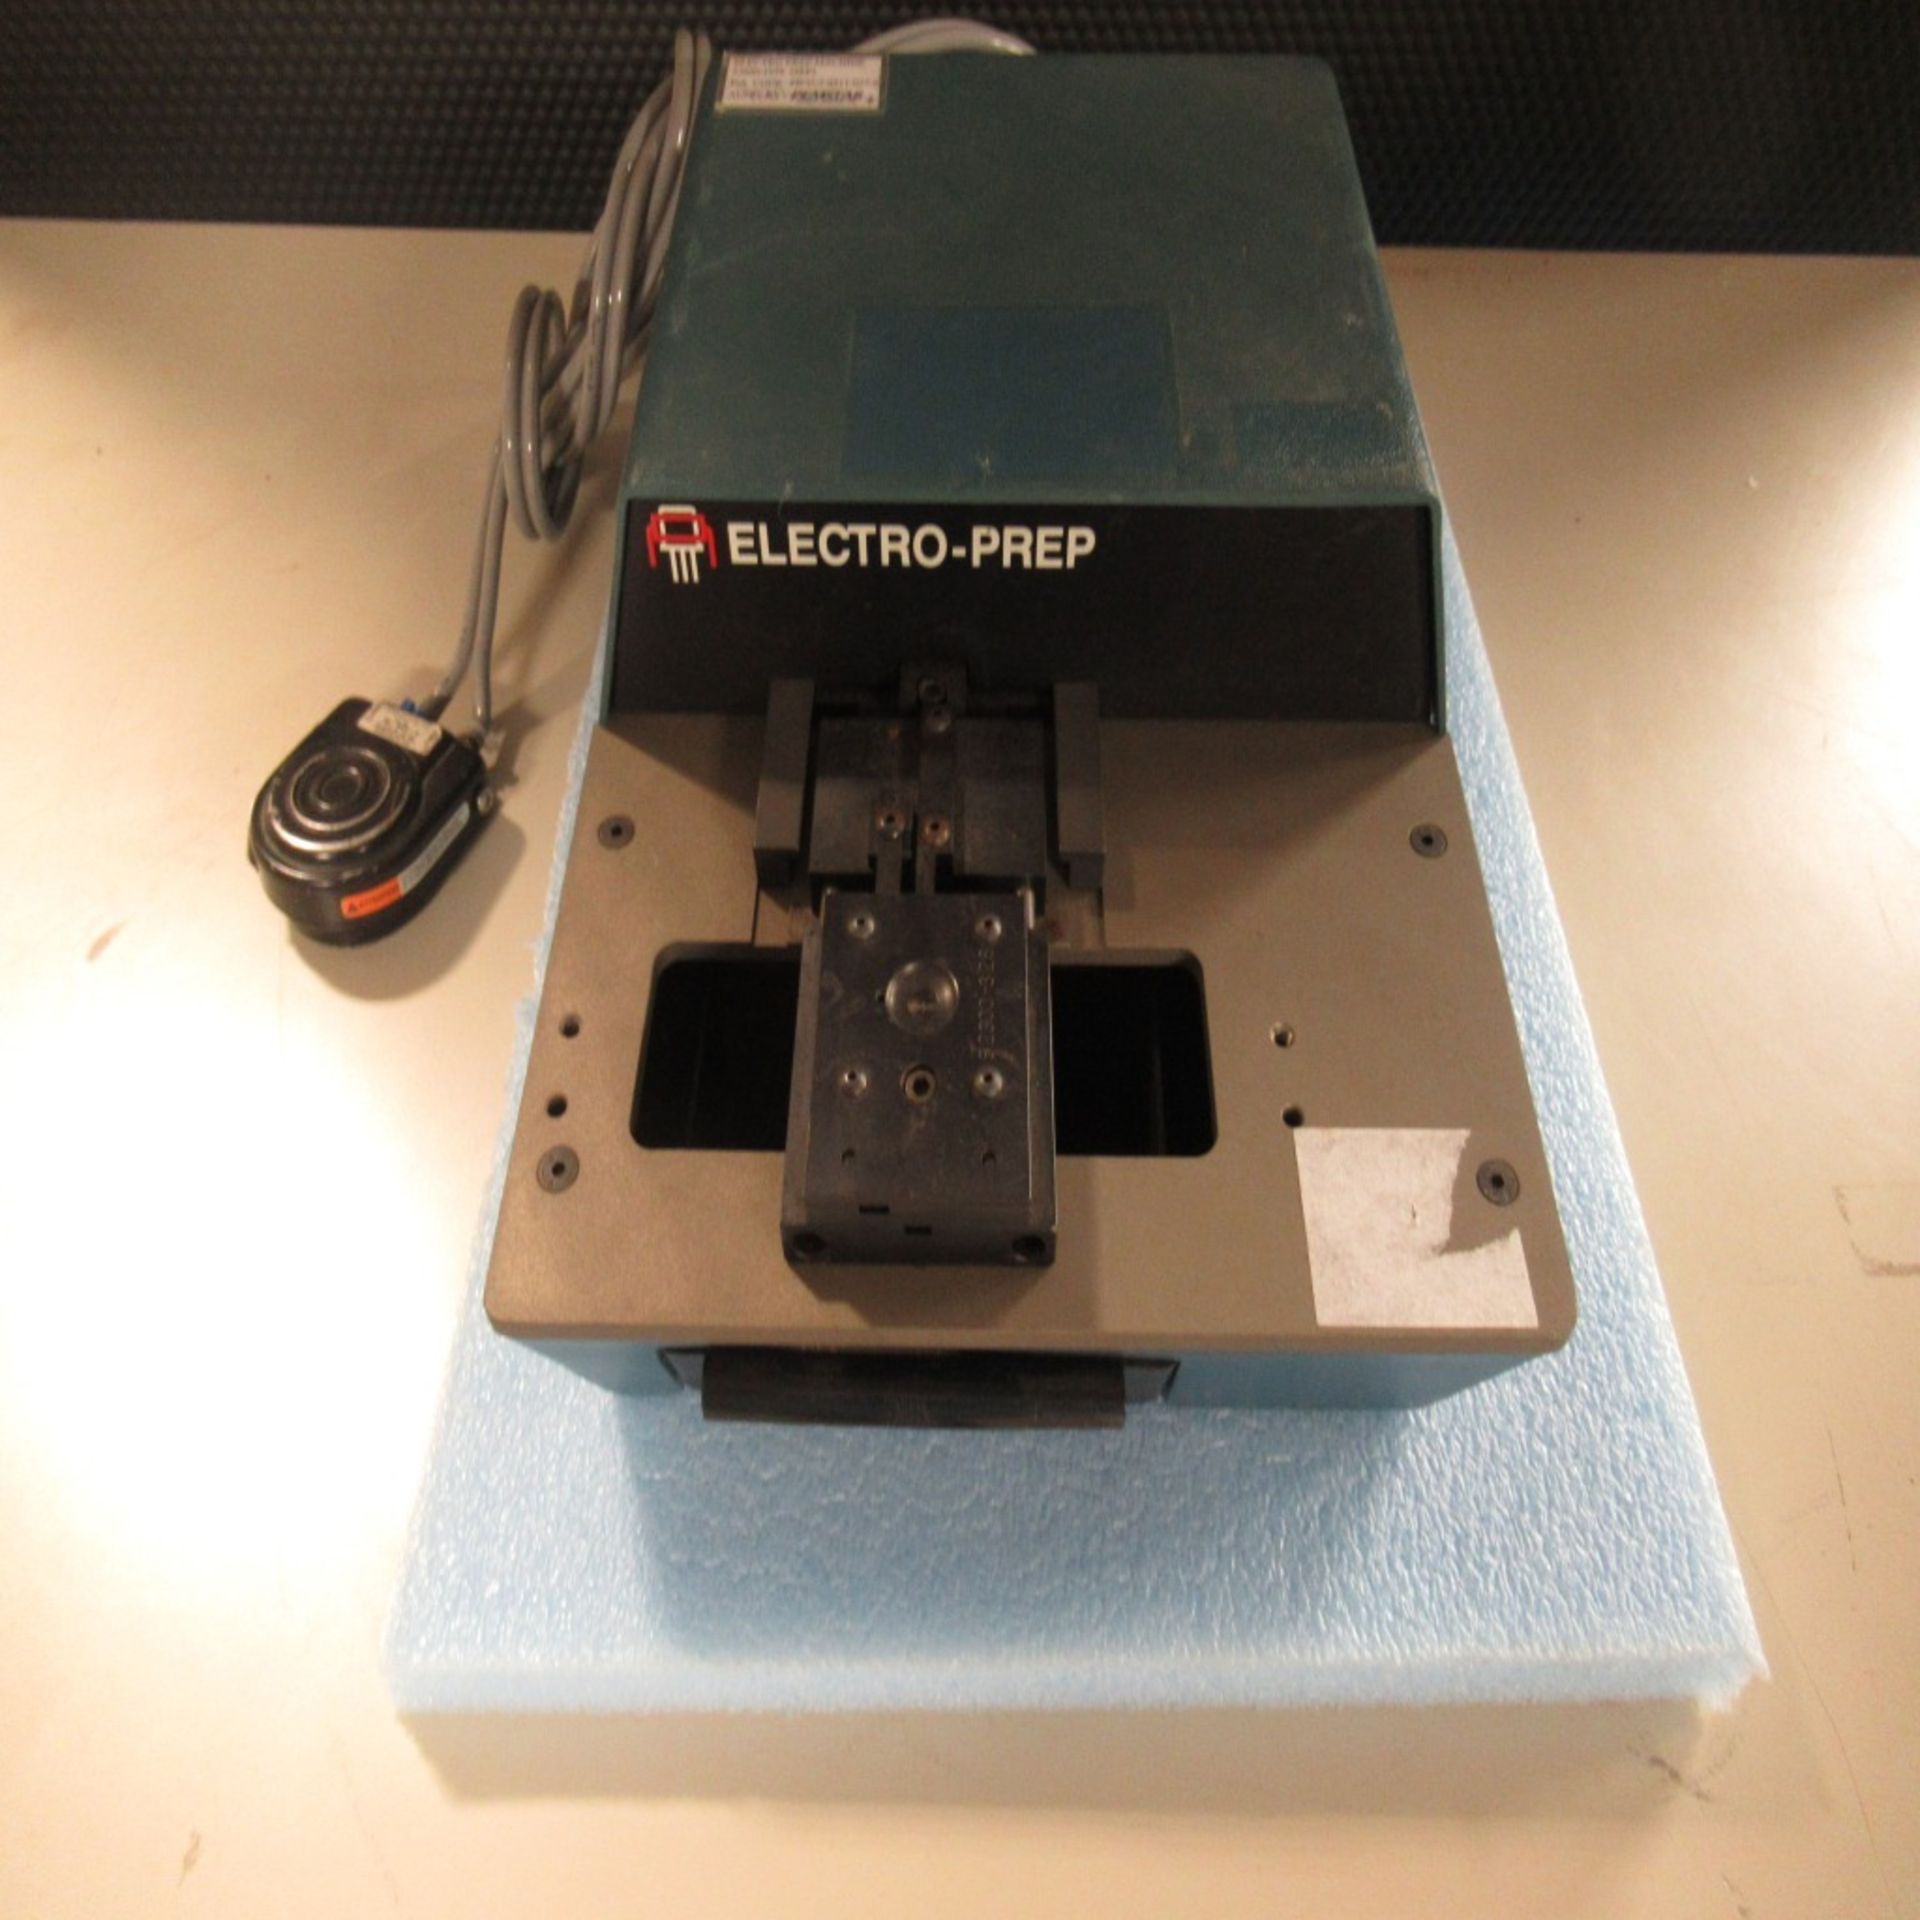 PHOTON SNAP SHOT MODEL 6000 *POWERS ON* NO SCREEN DISPLAY; FARNELL AP20-80 REGULATED POWER SUPPLY * - Image 117 of 222